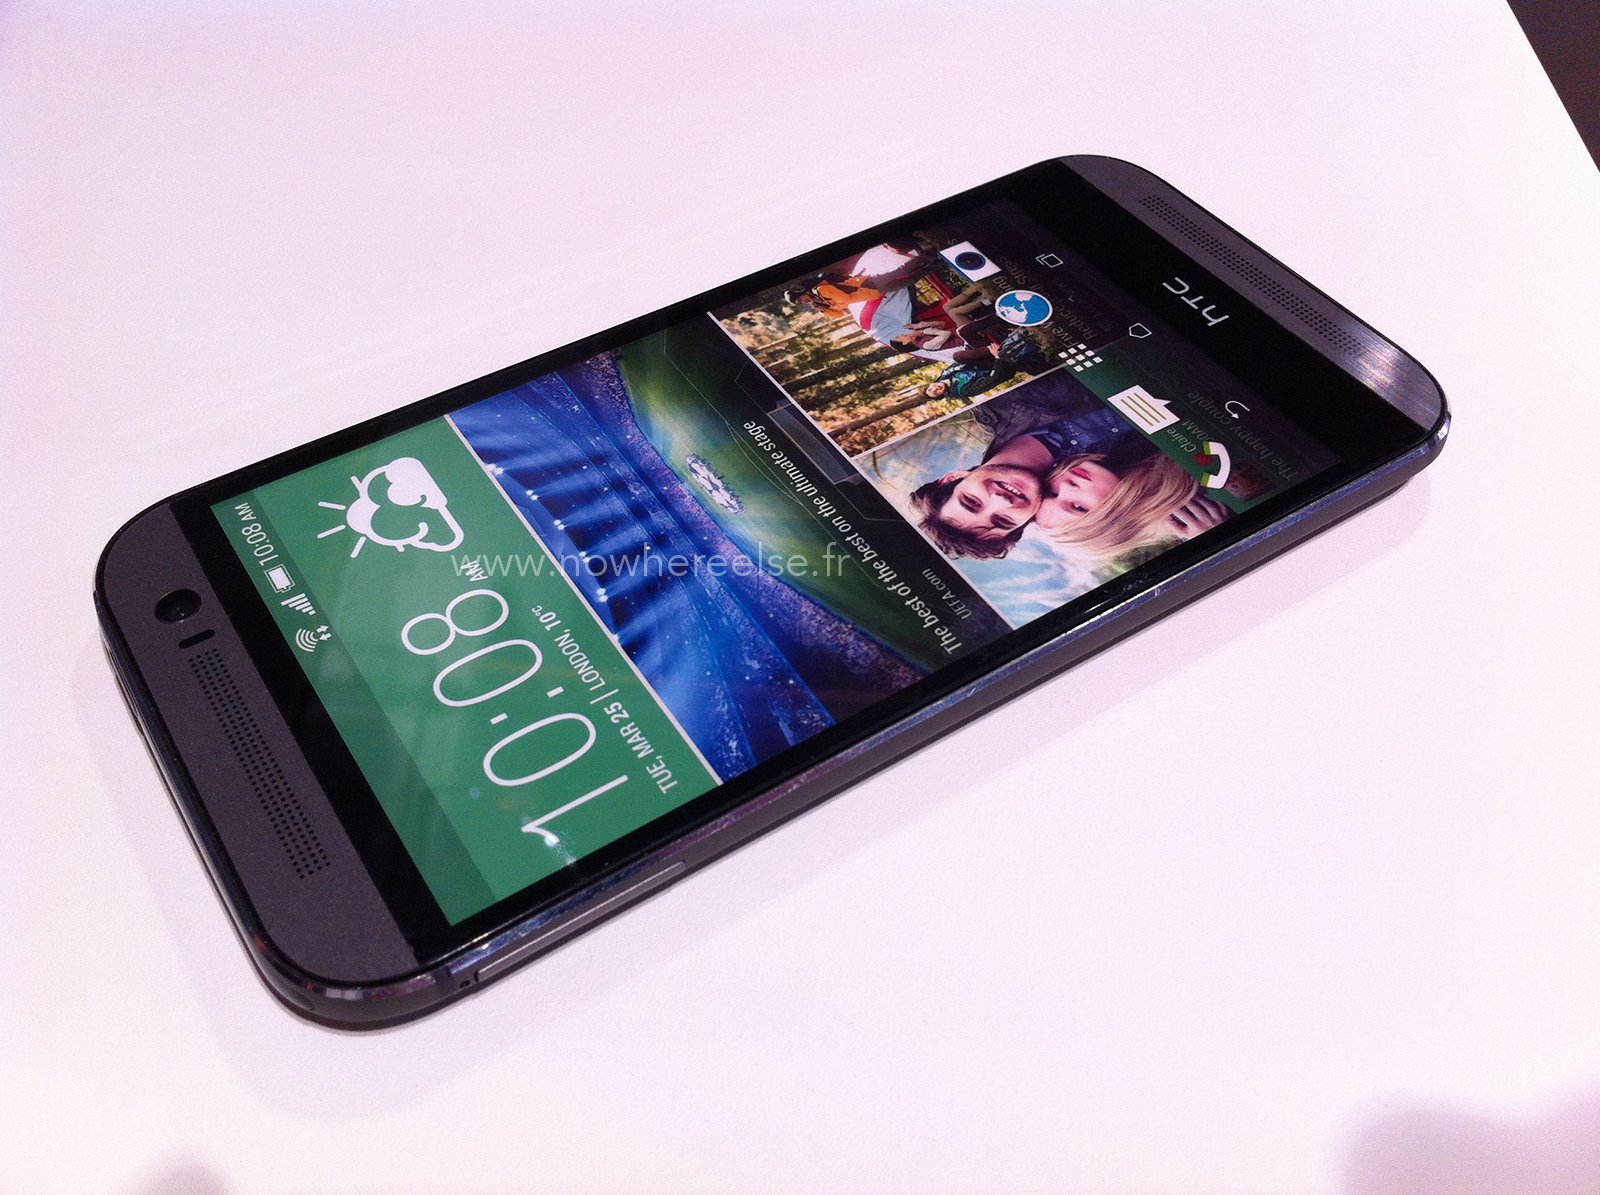 All-New-HTC-One-M8-2014-vs-iPhone-5S-LG-G2-Galaxy-S4-Xperia-Z1-Note-3-09